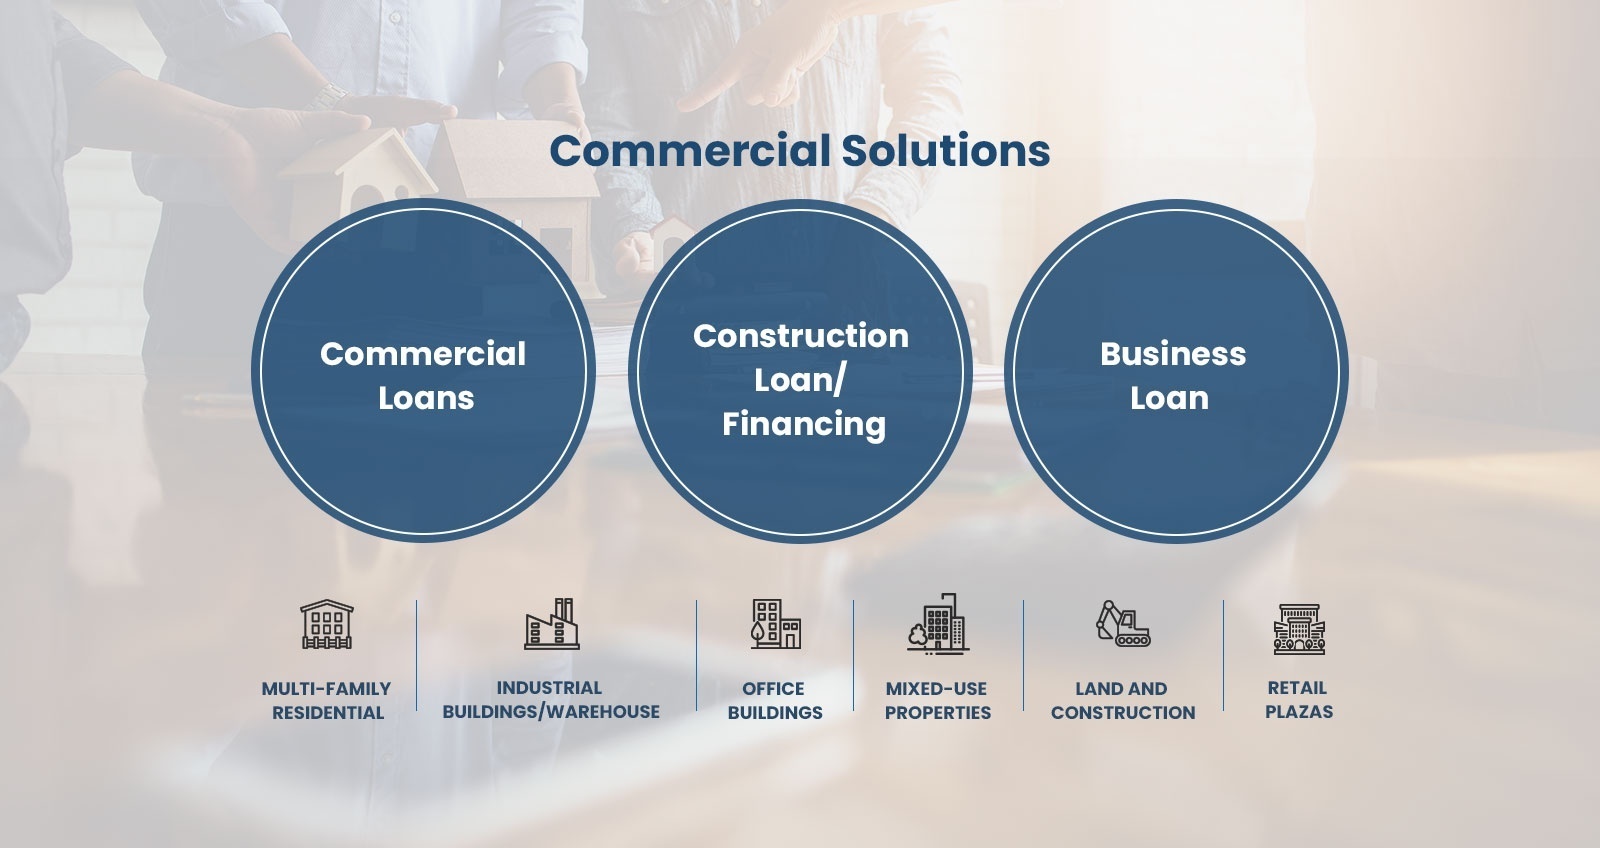 We provide financing options for your investments in commercial real estate through Commercial Mortgage Services GTA